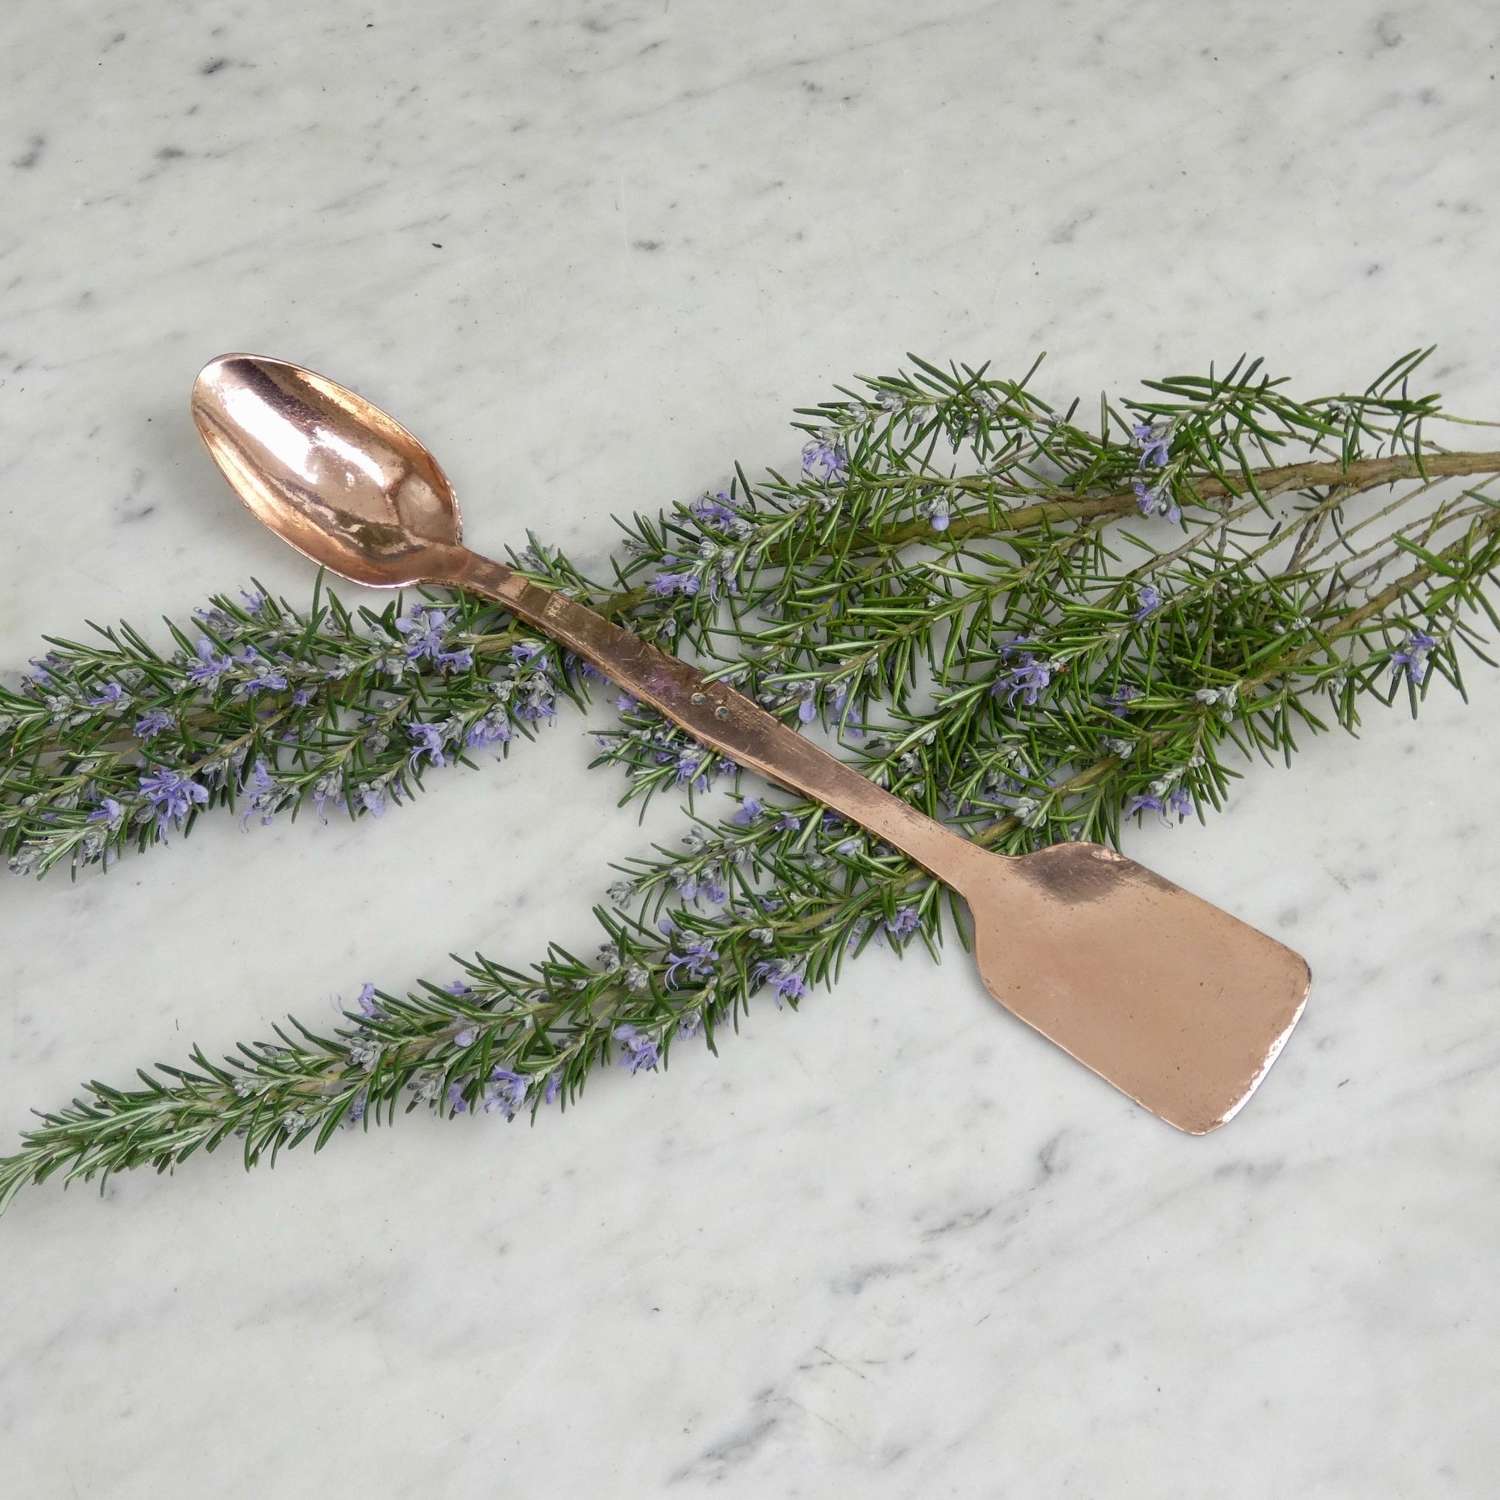 Double ended copper spoon & spatula